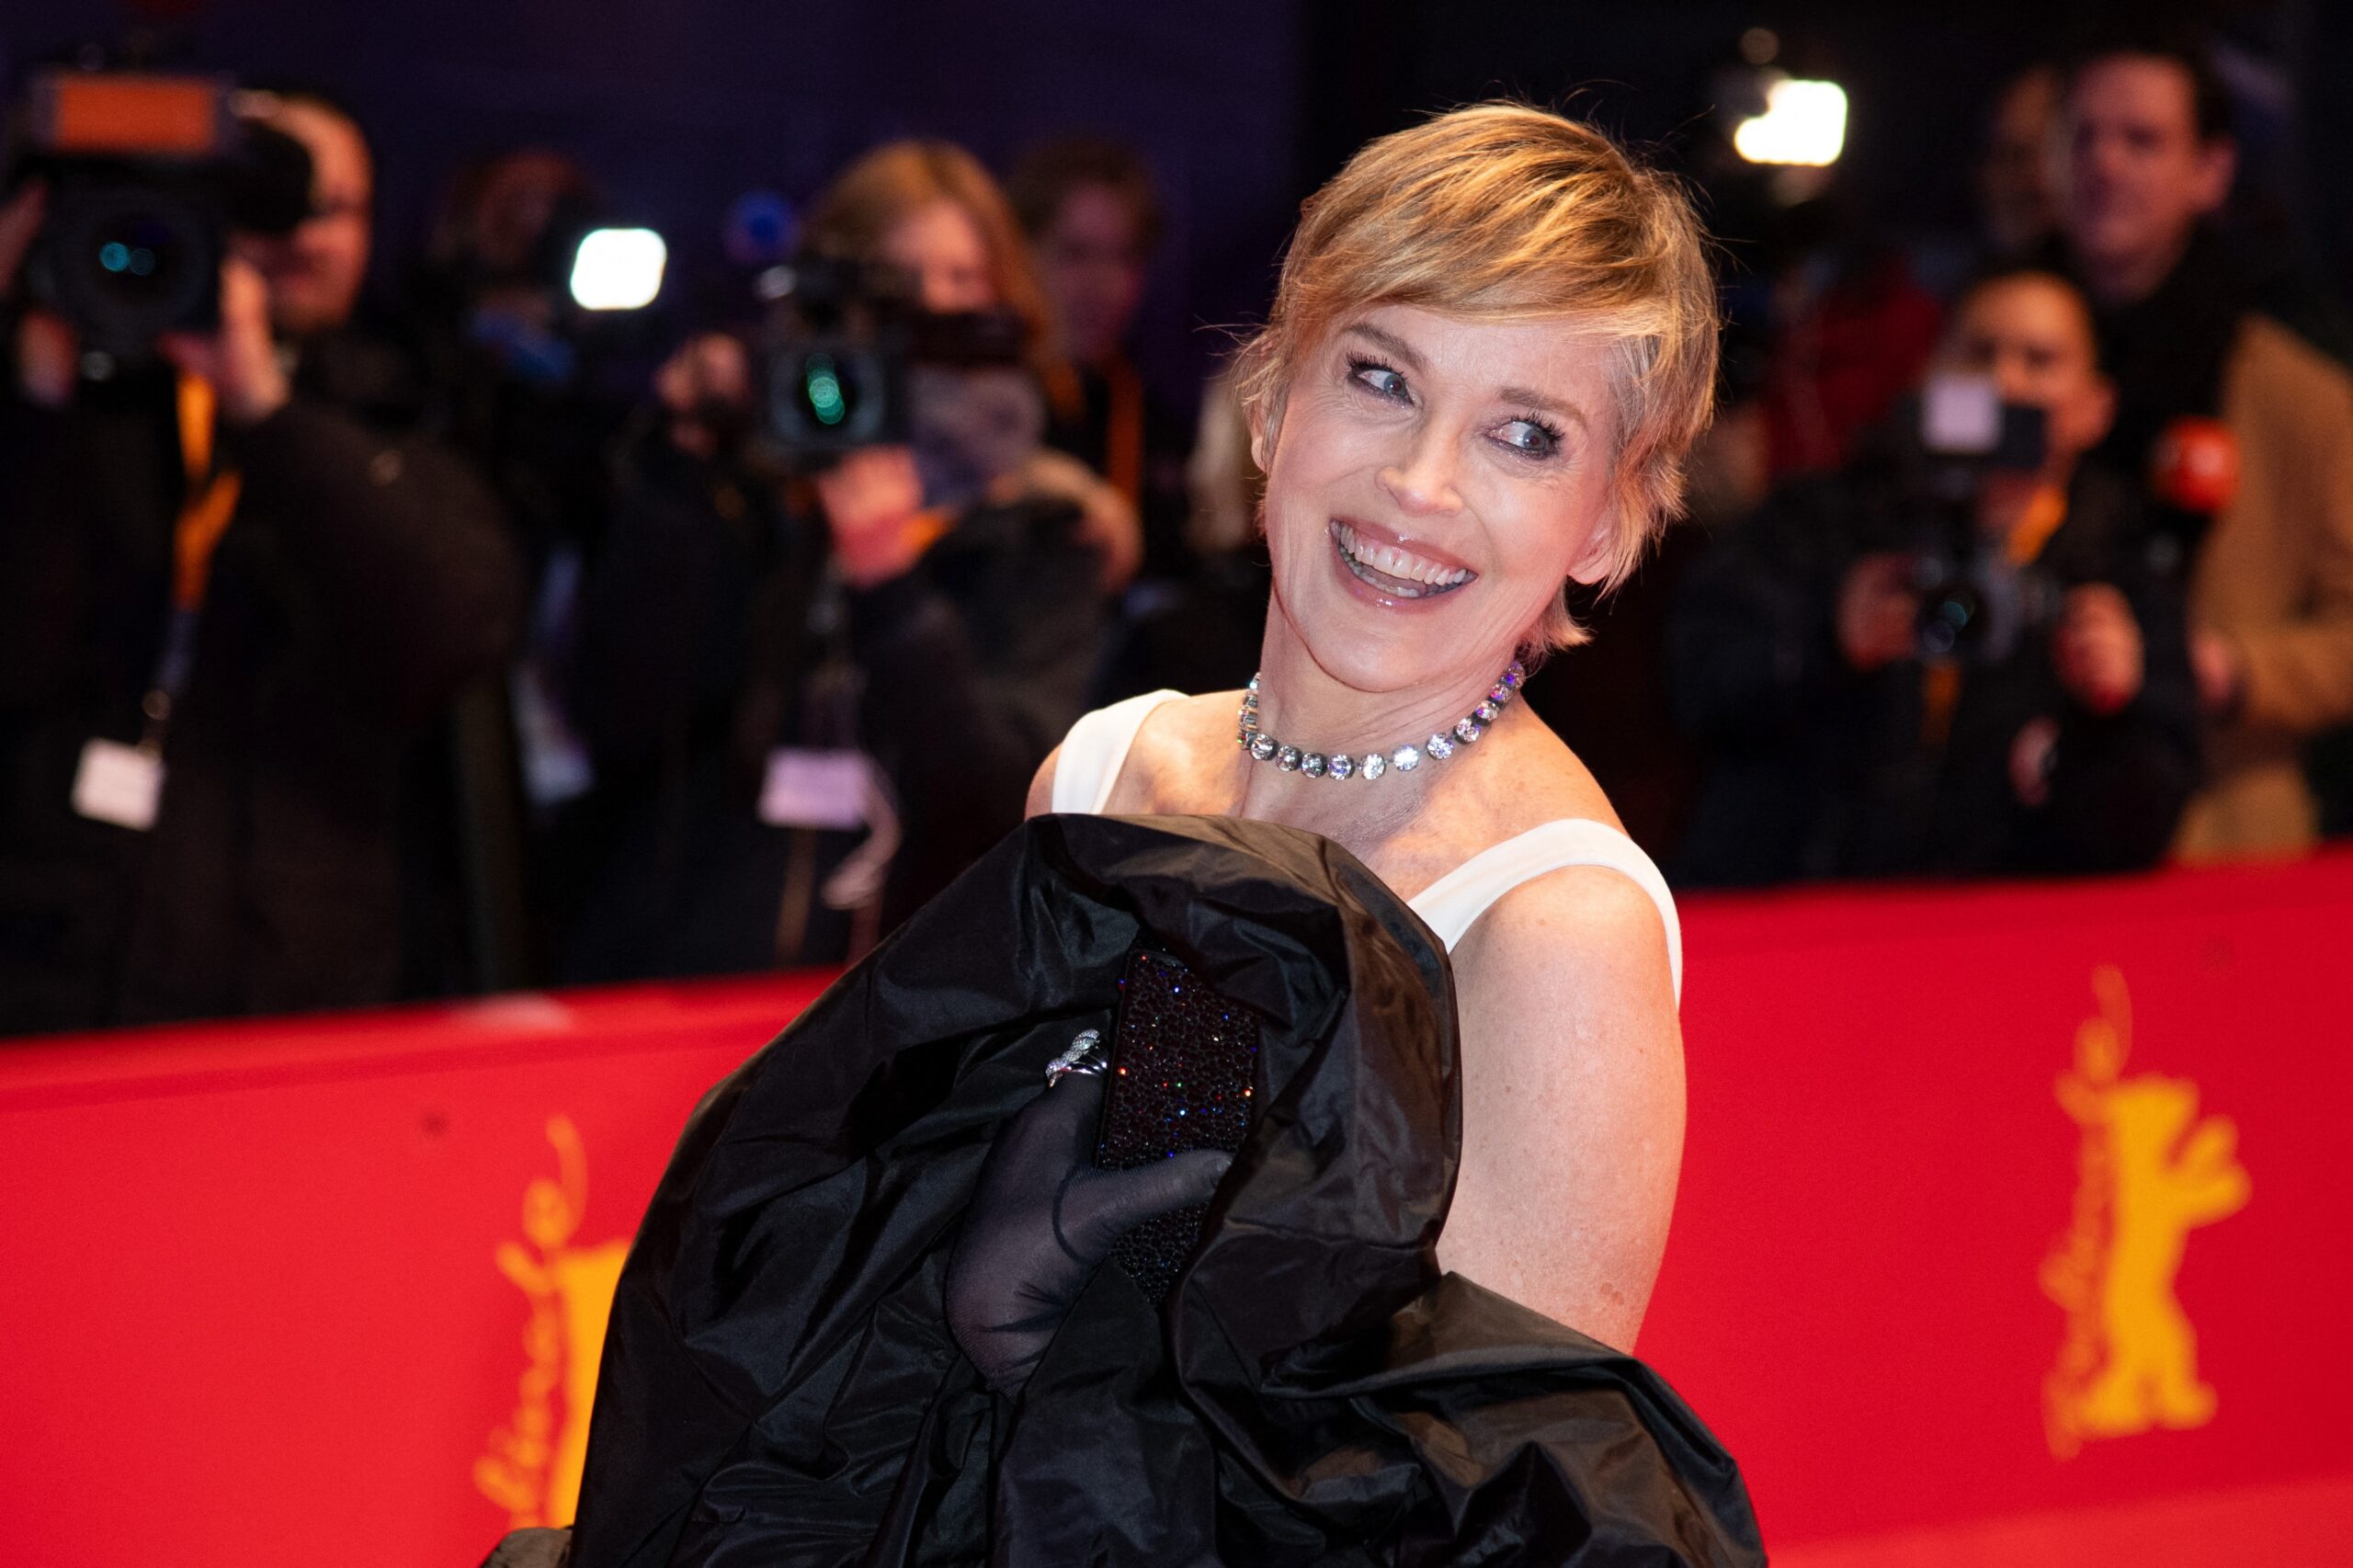 Sharon Stone attending the Honorary Golden Bear And Homage For Martin Scorsese Red Carpet during the 74th Berlinale International Film Festival Berlin at Grand Hyatt Hotel in Berlin, Germany, on February 20, 2024.,Image: 848836572, License: Rights-managed, Restrictions: , Model Release: no, Credit line: Marechal Aurore/ABACA / Abaca Press / Profimedia